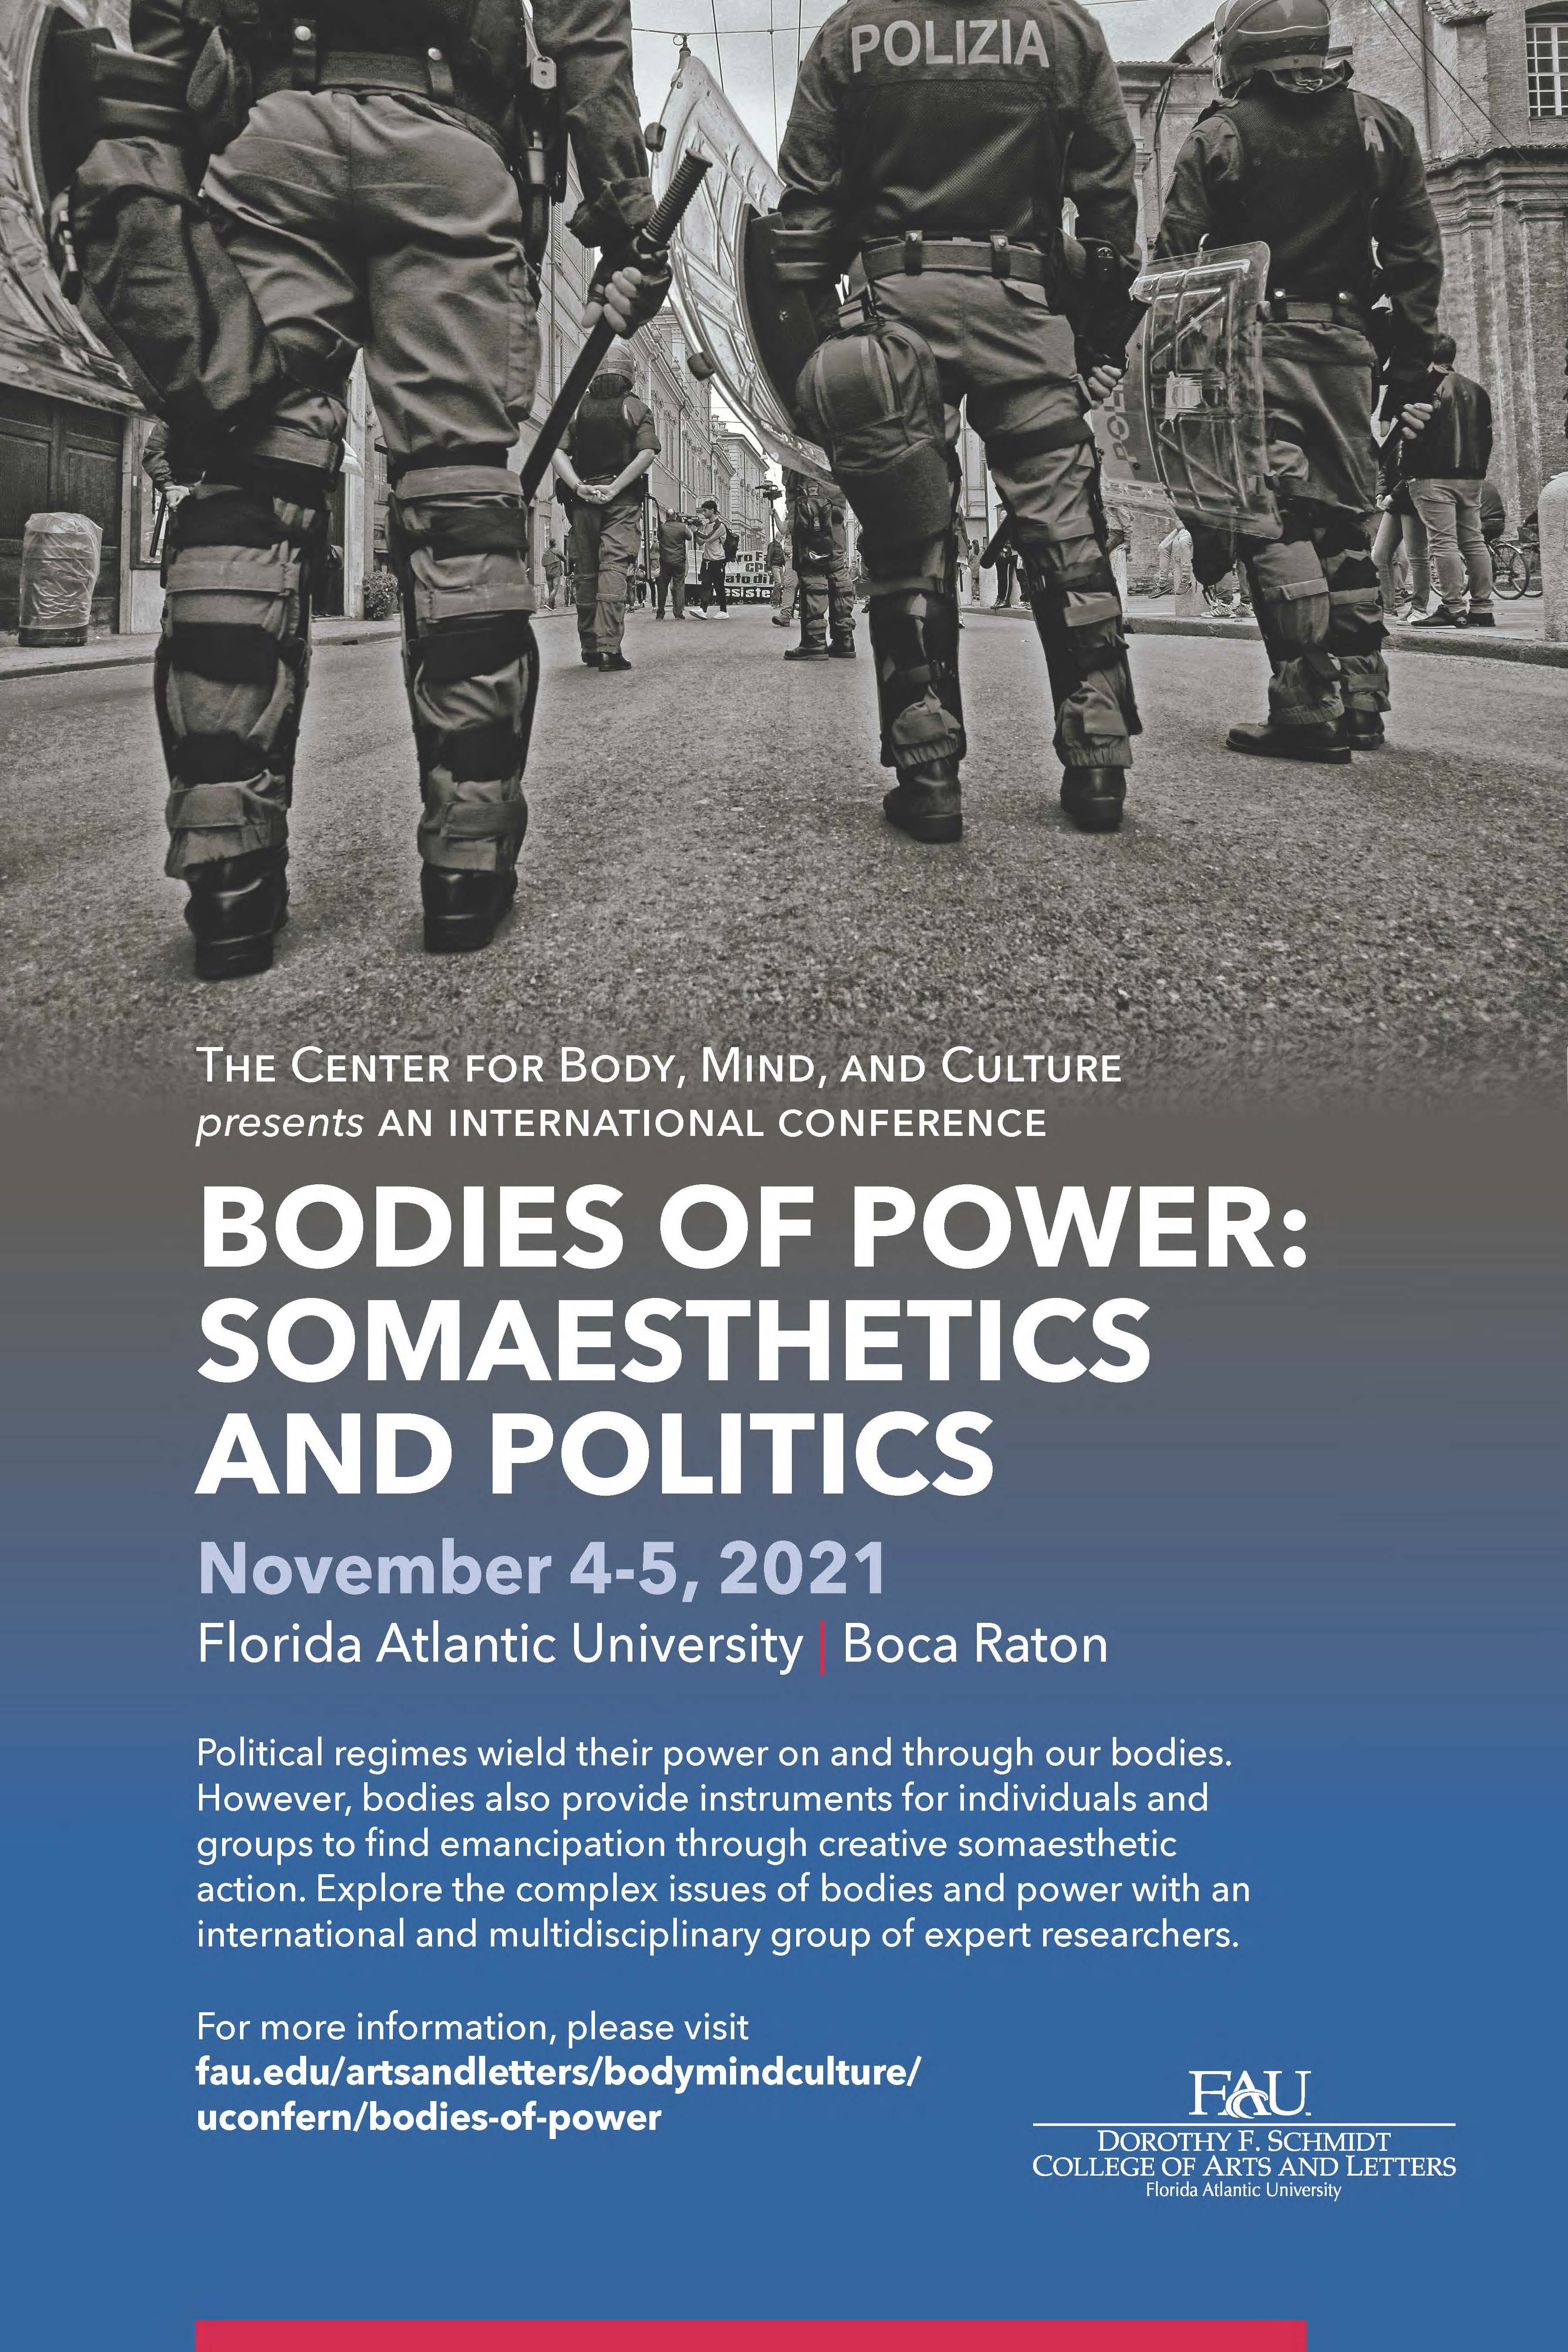 Bodies of Power Poster